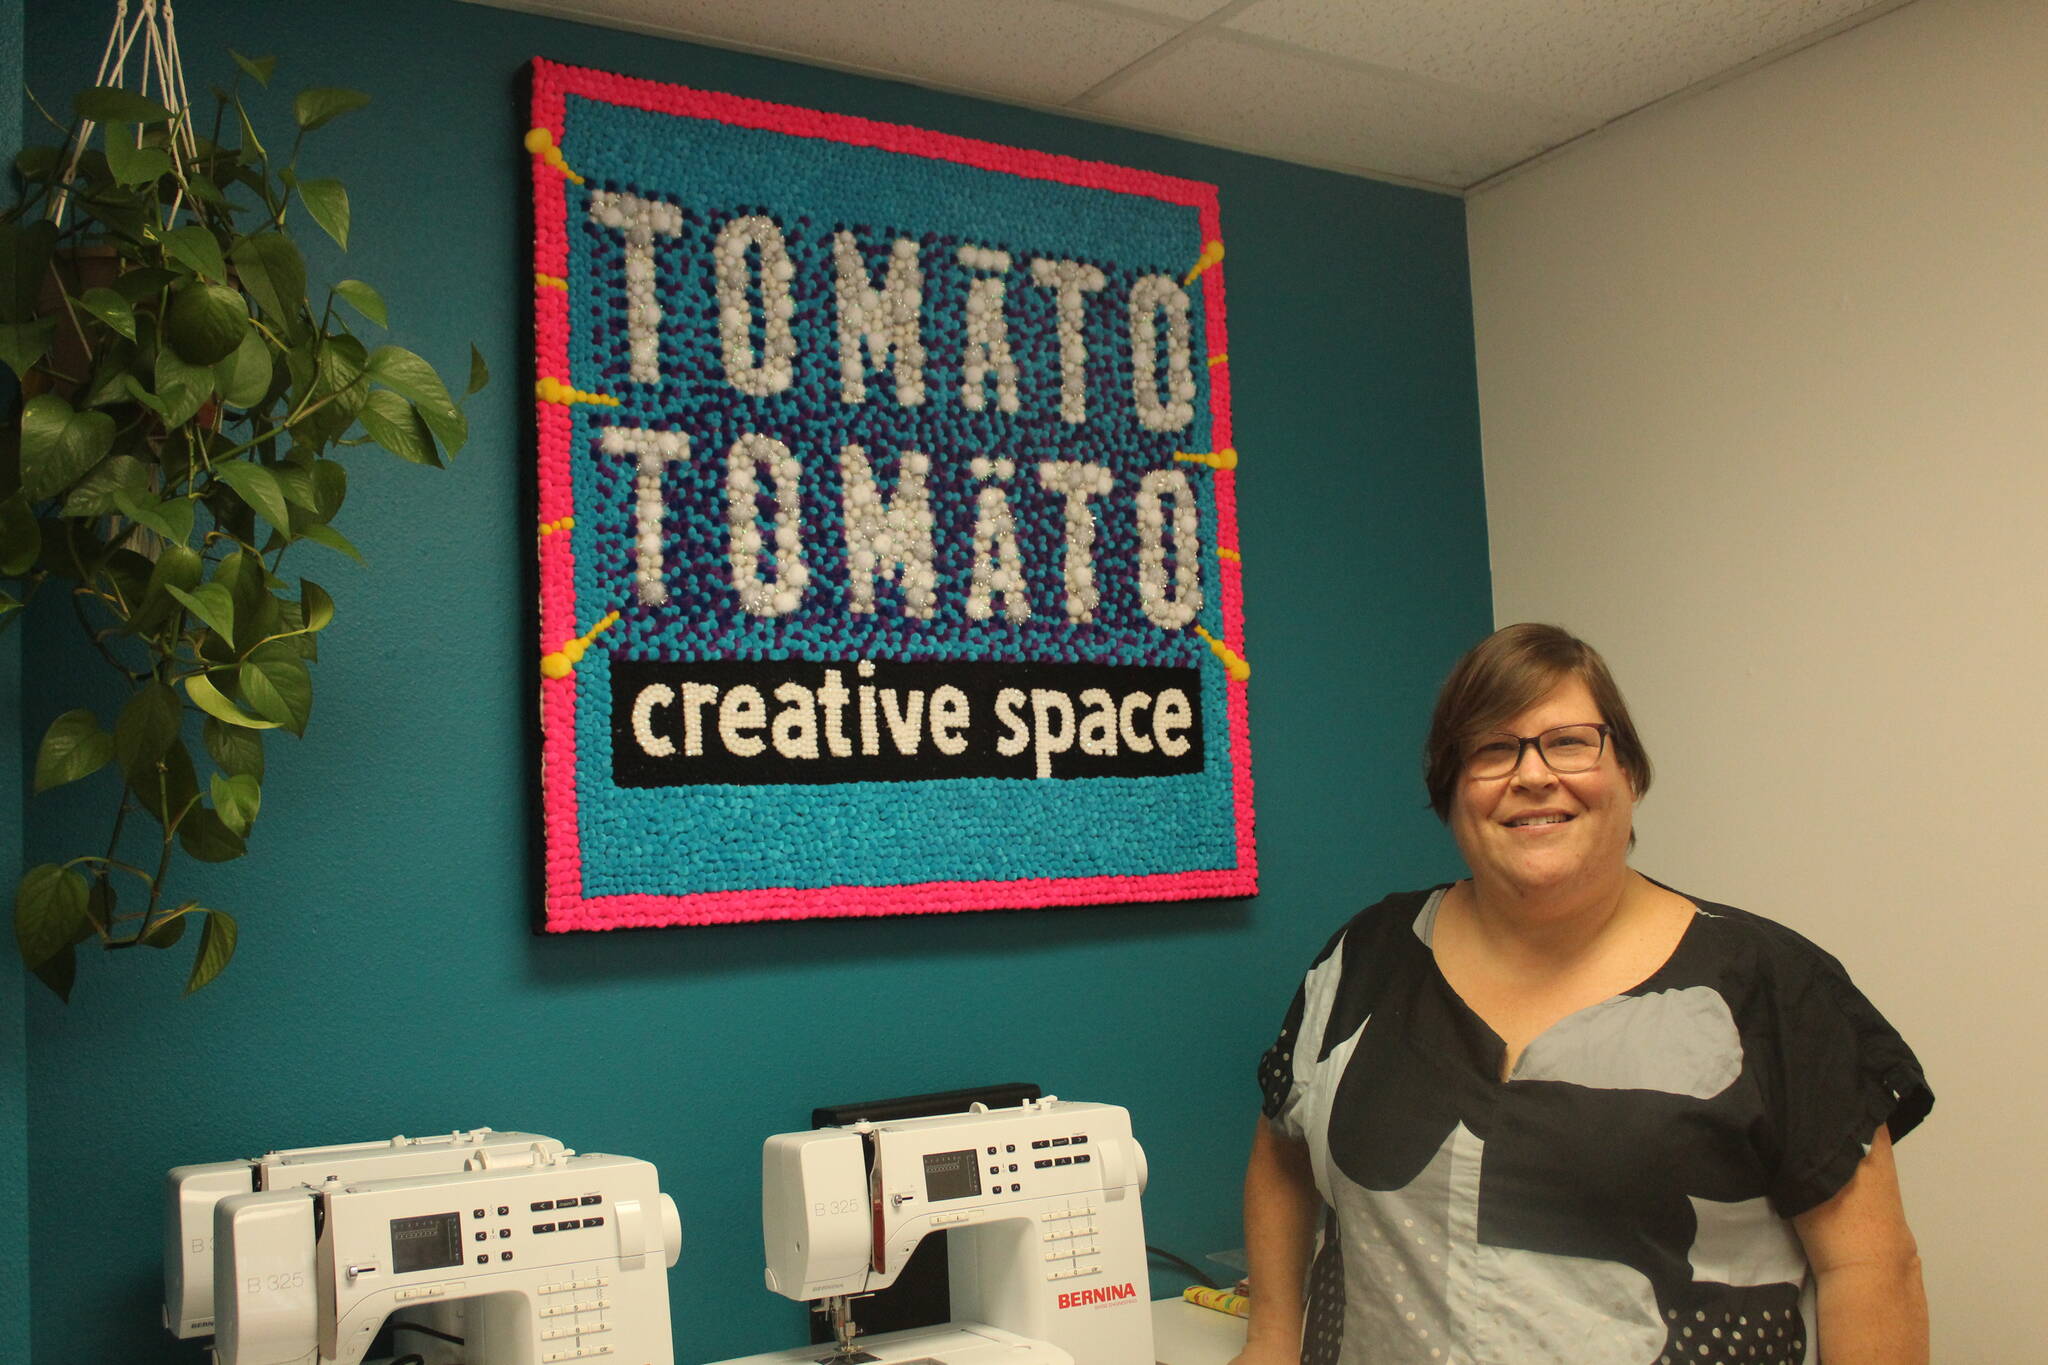 Kelly Affleck, owner of Tomāto Tomäto Creative Space in Renton. Along with original craft kits, Tomāto Tomäto Creative Space is filled with every possible craft tool and material. Photos by Bailey Jo Josie/Alb Media.